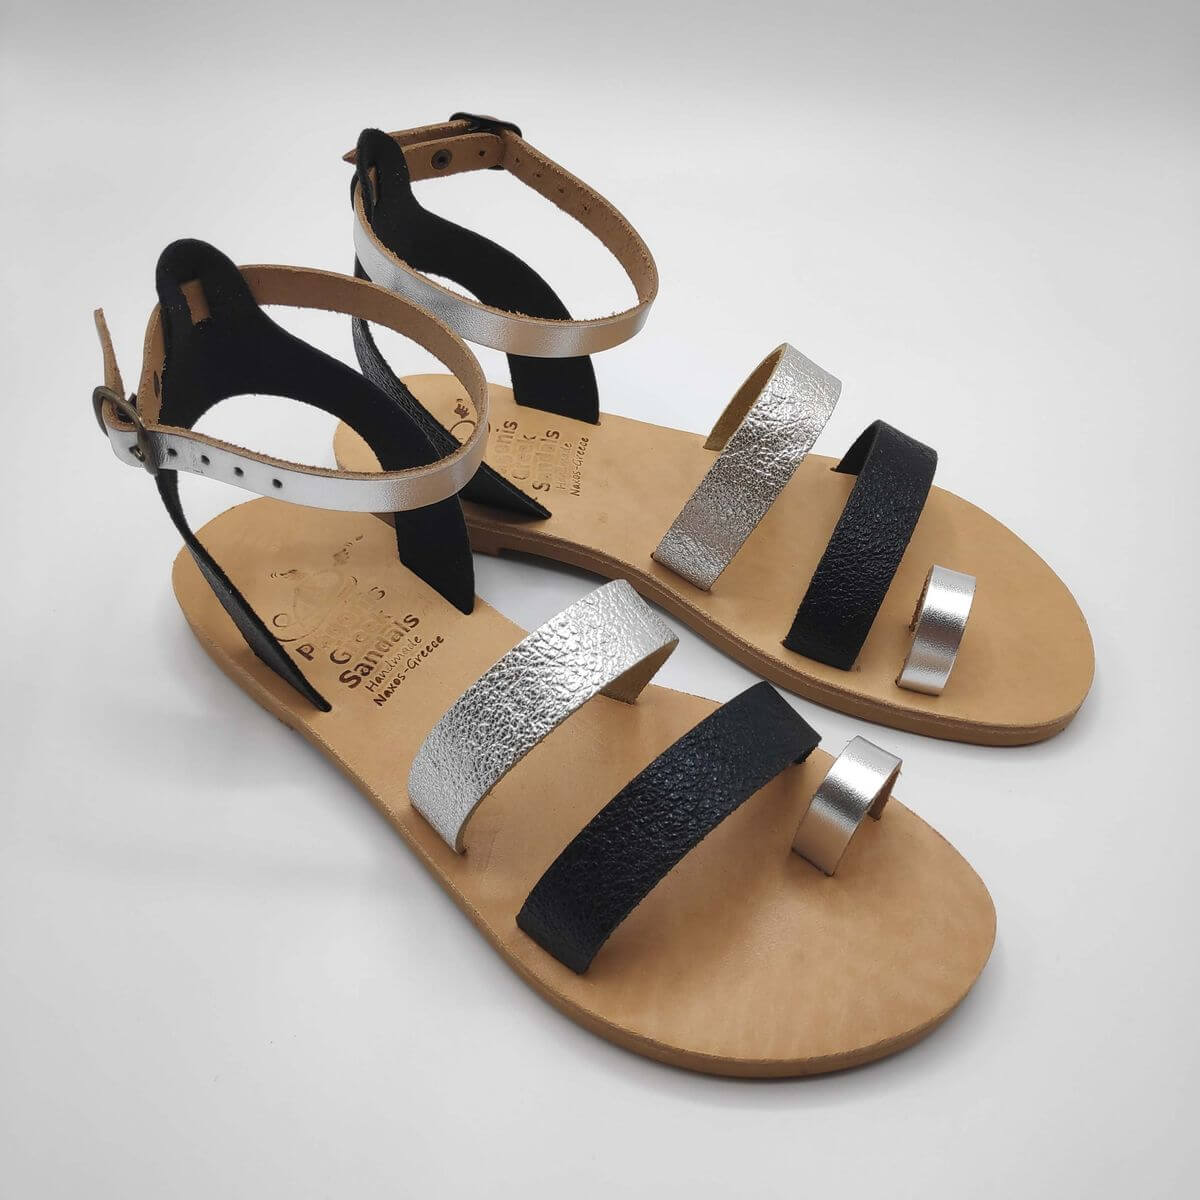 Black Silver leather dressy sandals with two straps, toe ring and high ankle strap, side view